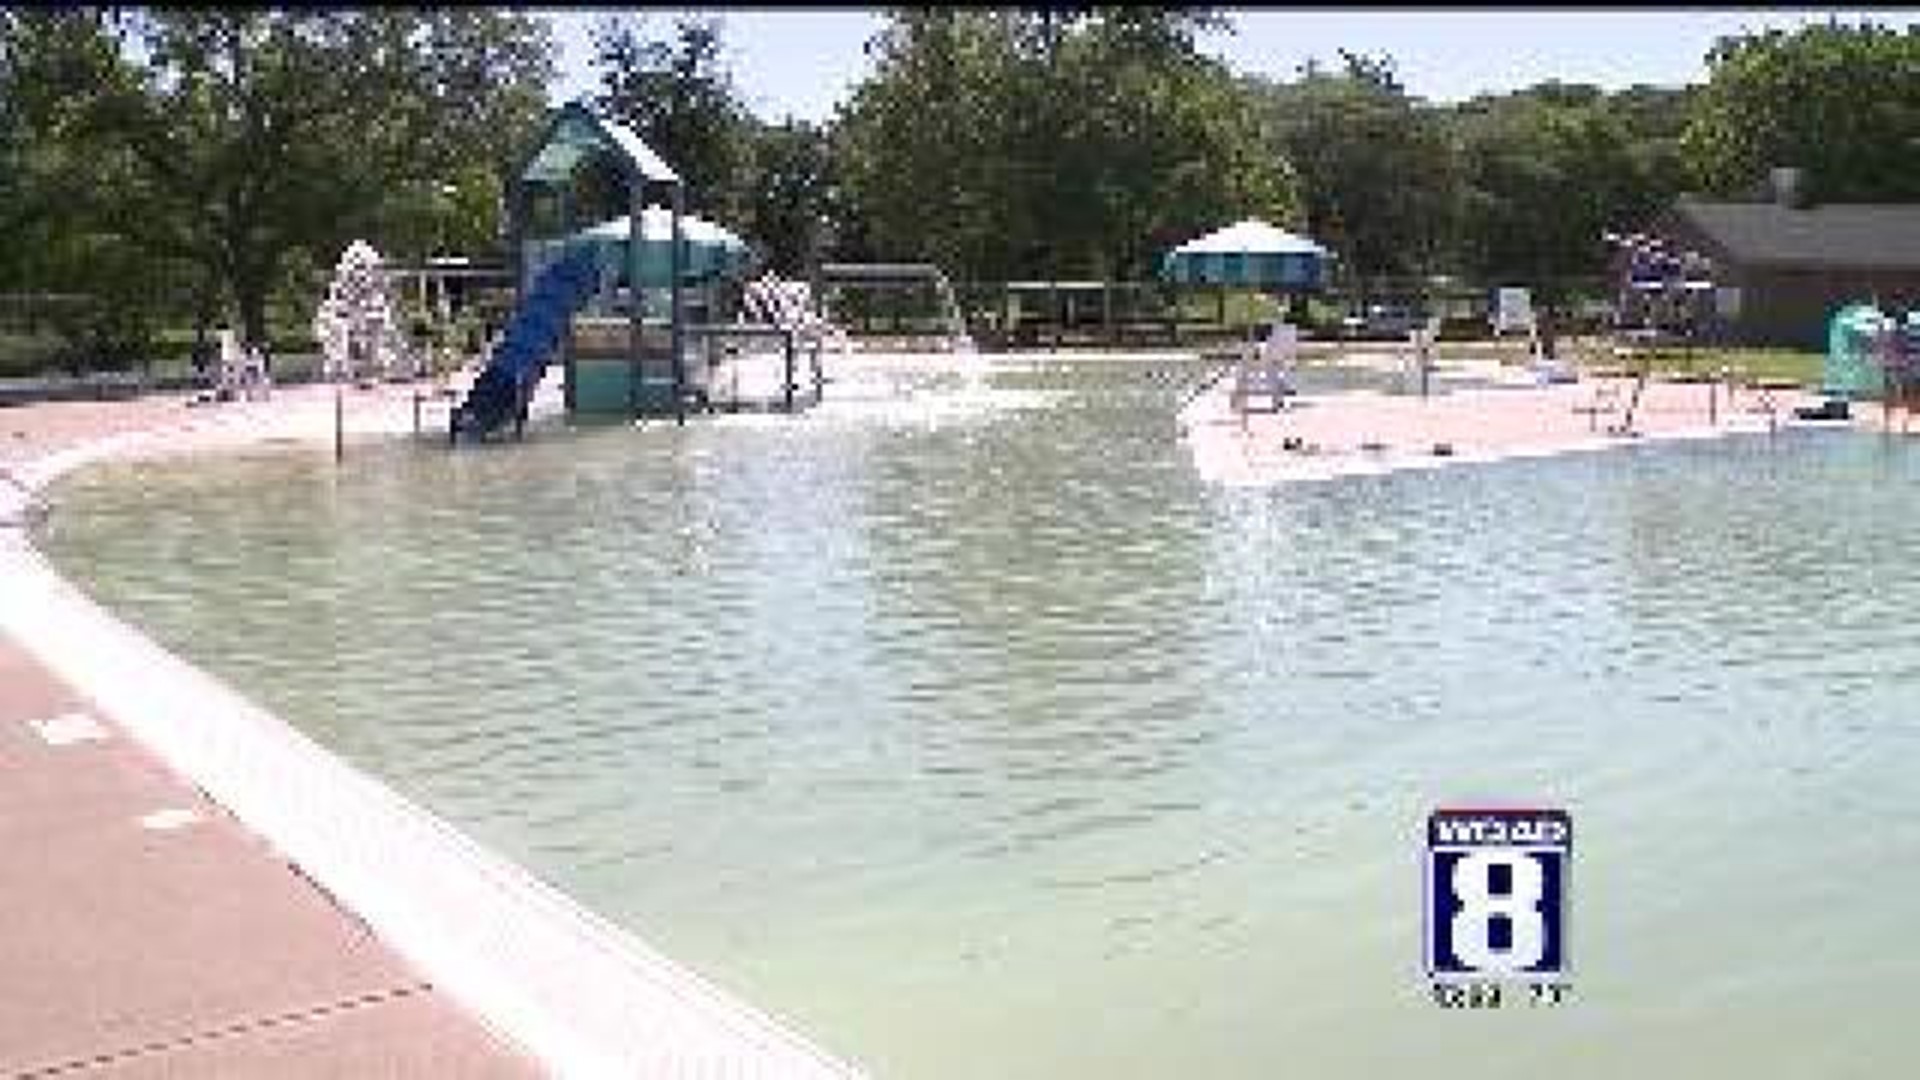 Riverside Pool not likely to open Saturday